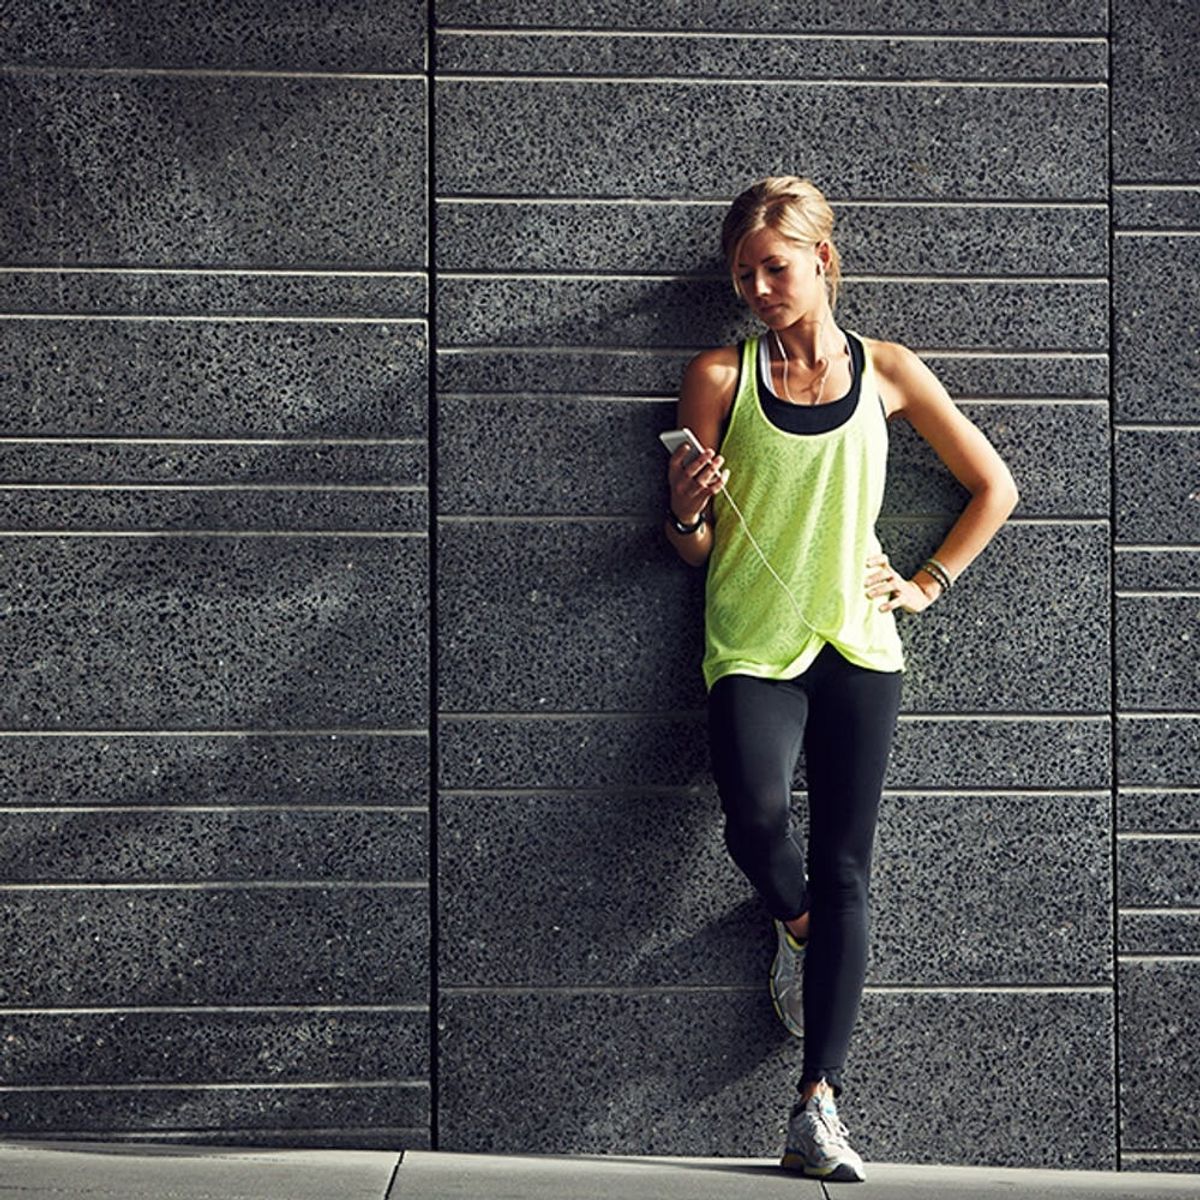 7 #Fitspiration Mistakes to Avoid, According to Fitness Experts